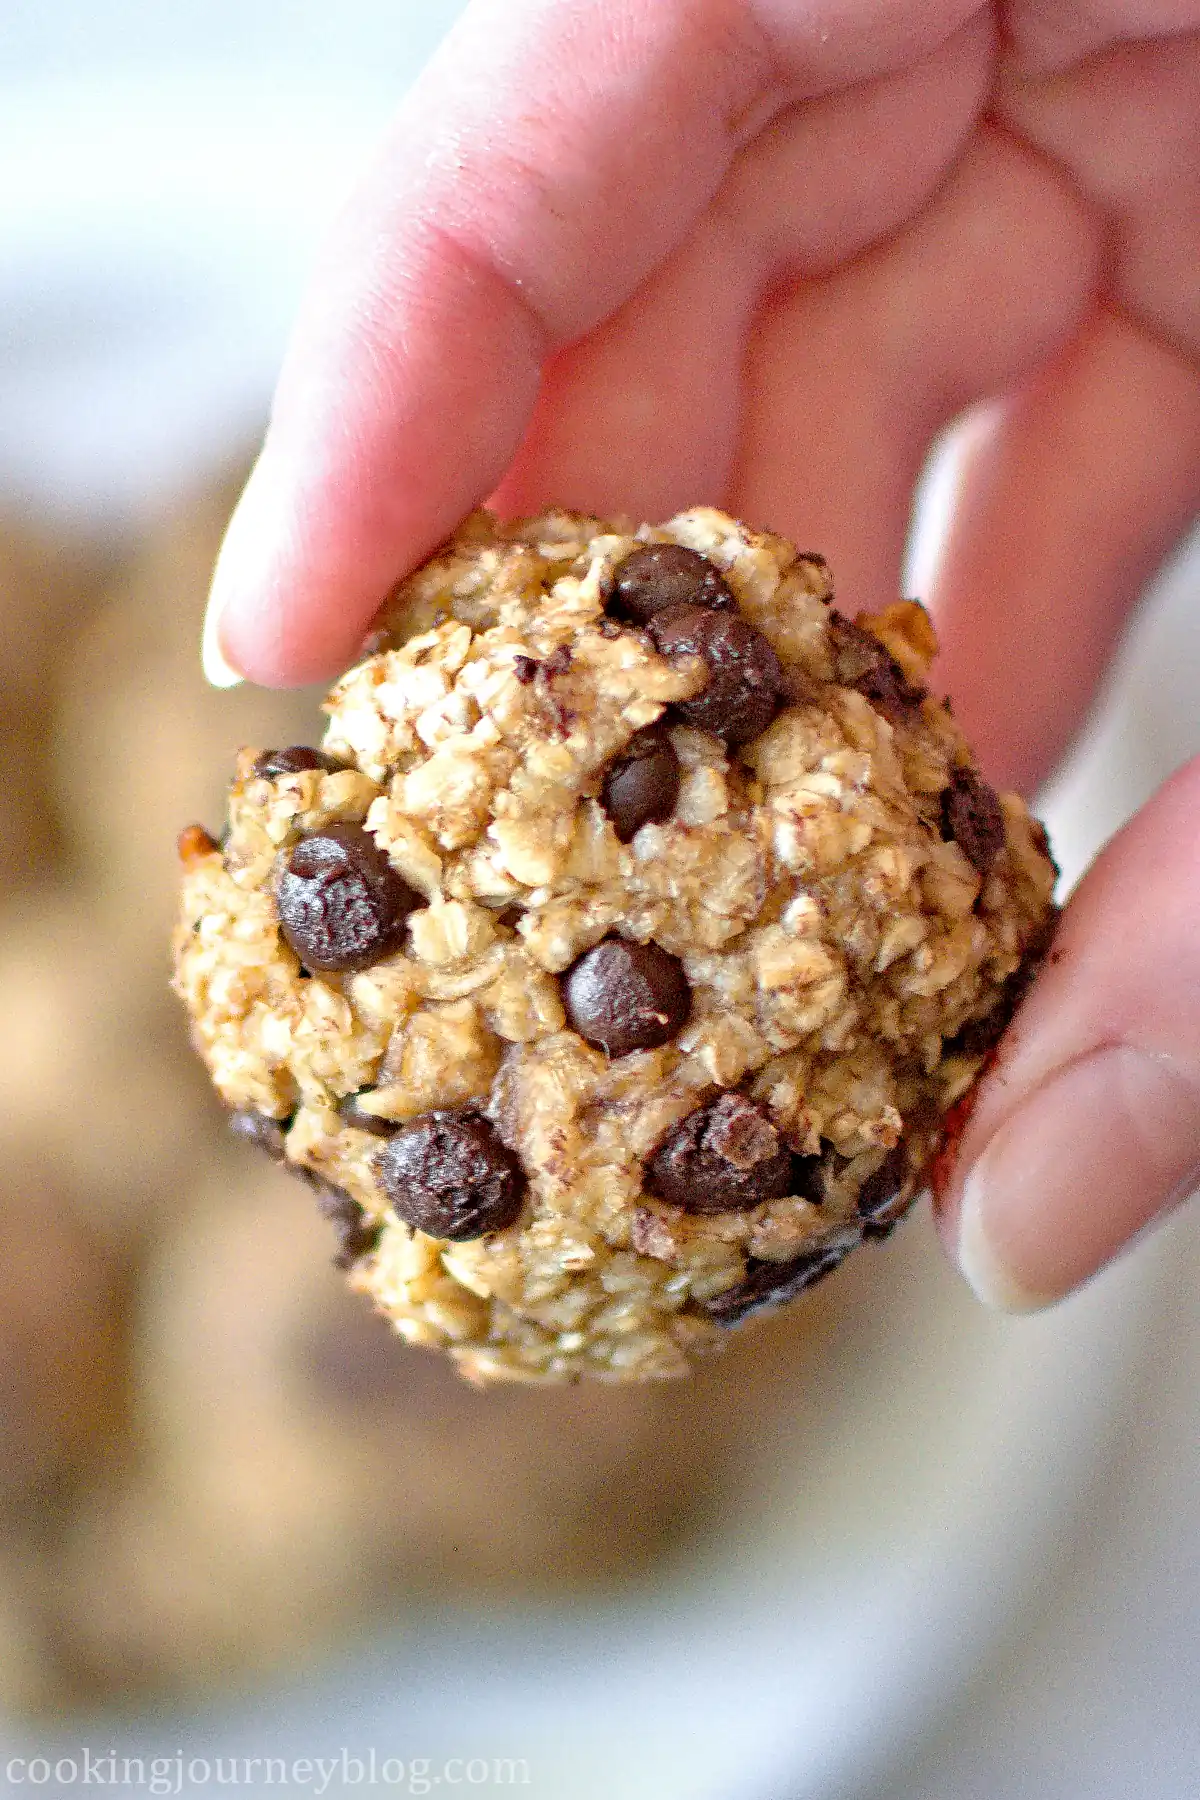 Holding 3 Ingredient Oatmeal Banana Cookie with fingers